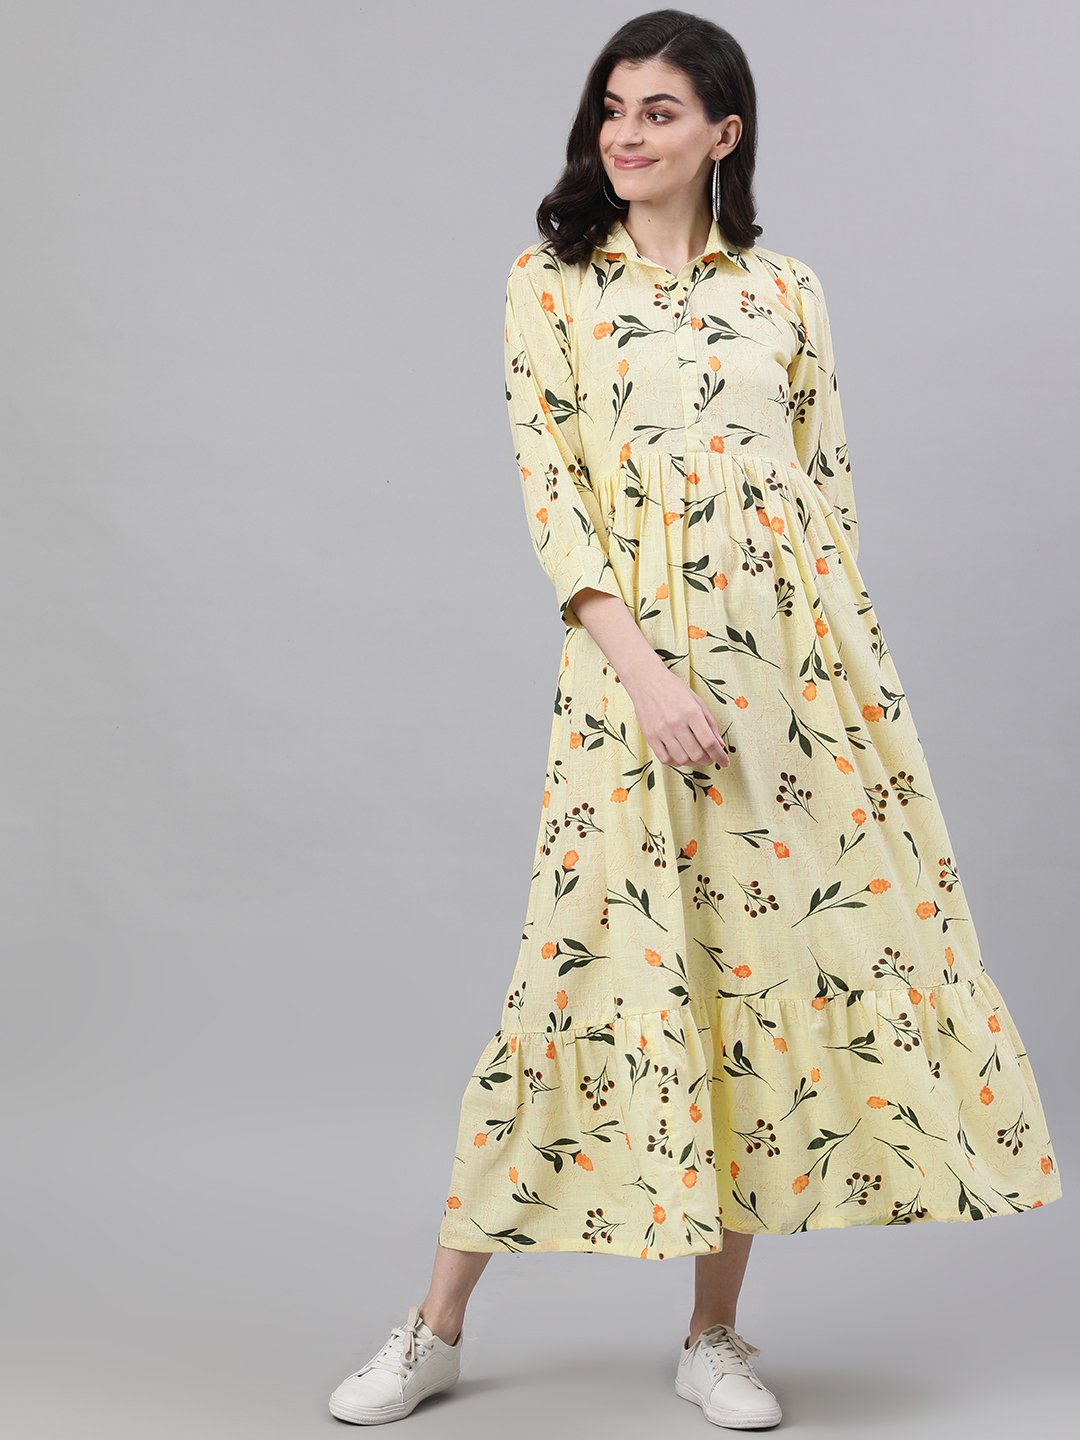 Women's Yellow Floral Printed Shirt Collar Cotton A-Line Dress - Nayo Clothing